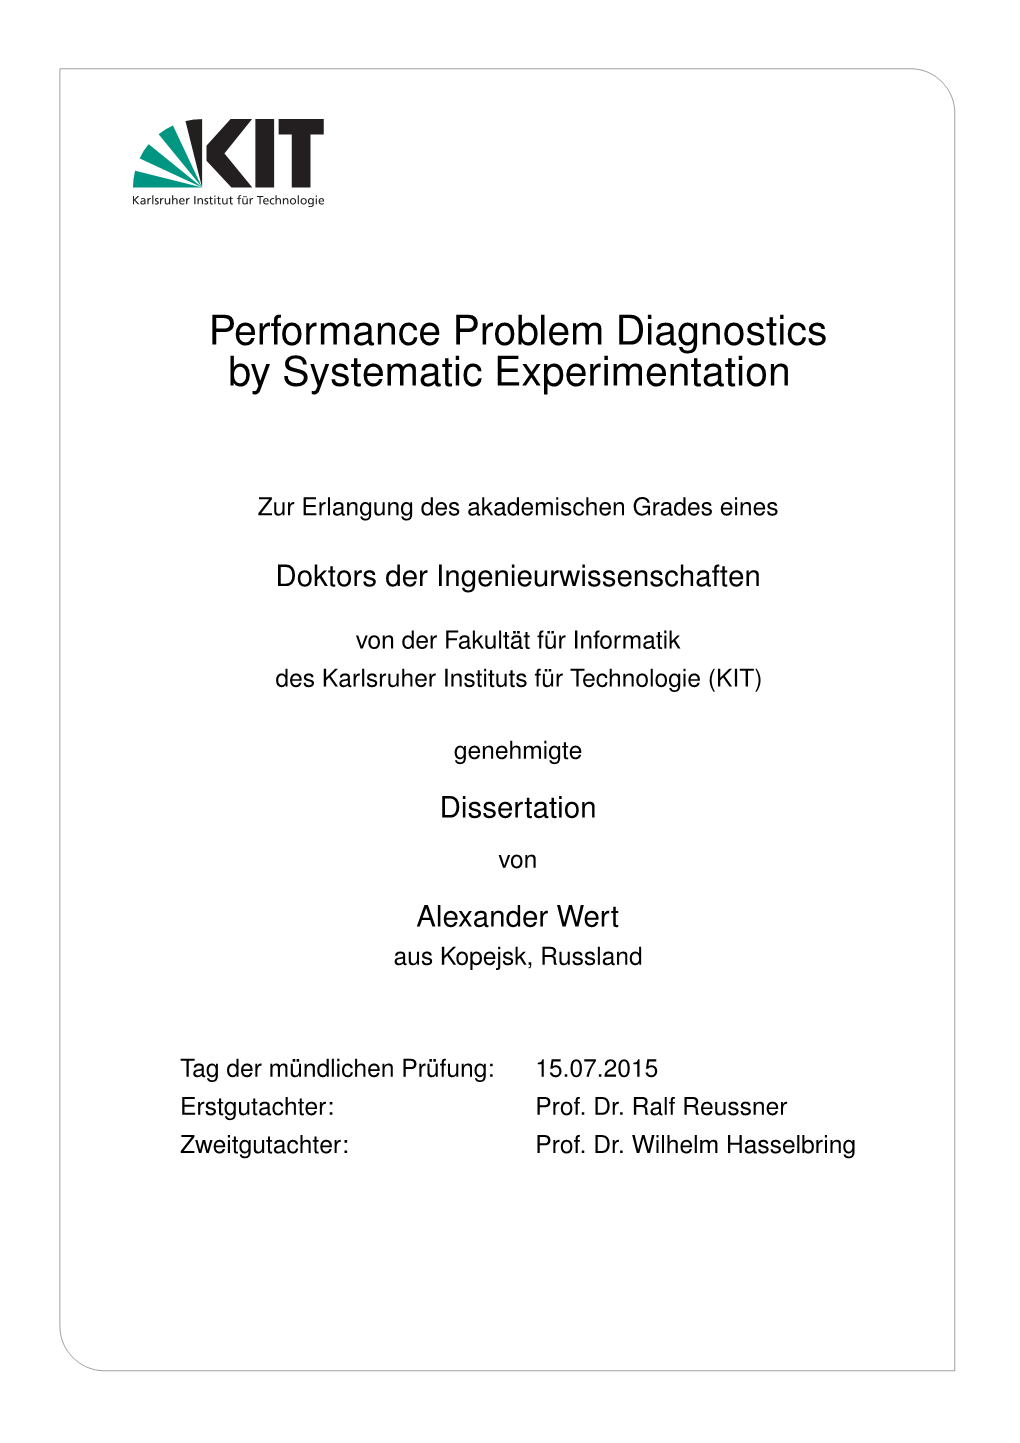 Performance Problem Diagnostics by Systematic Experimentation